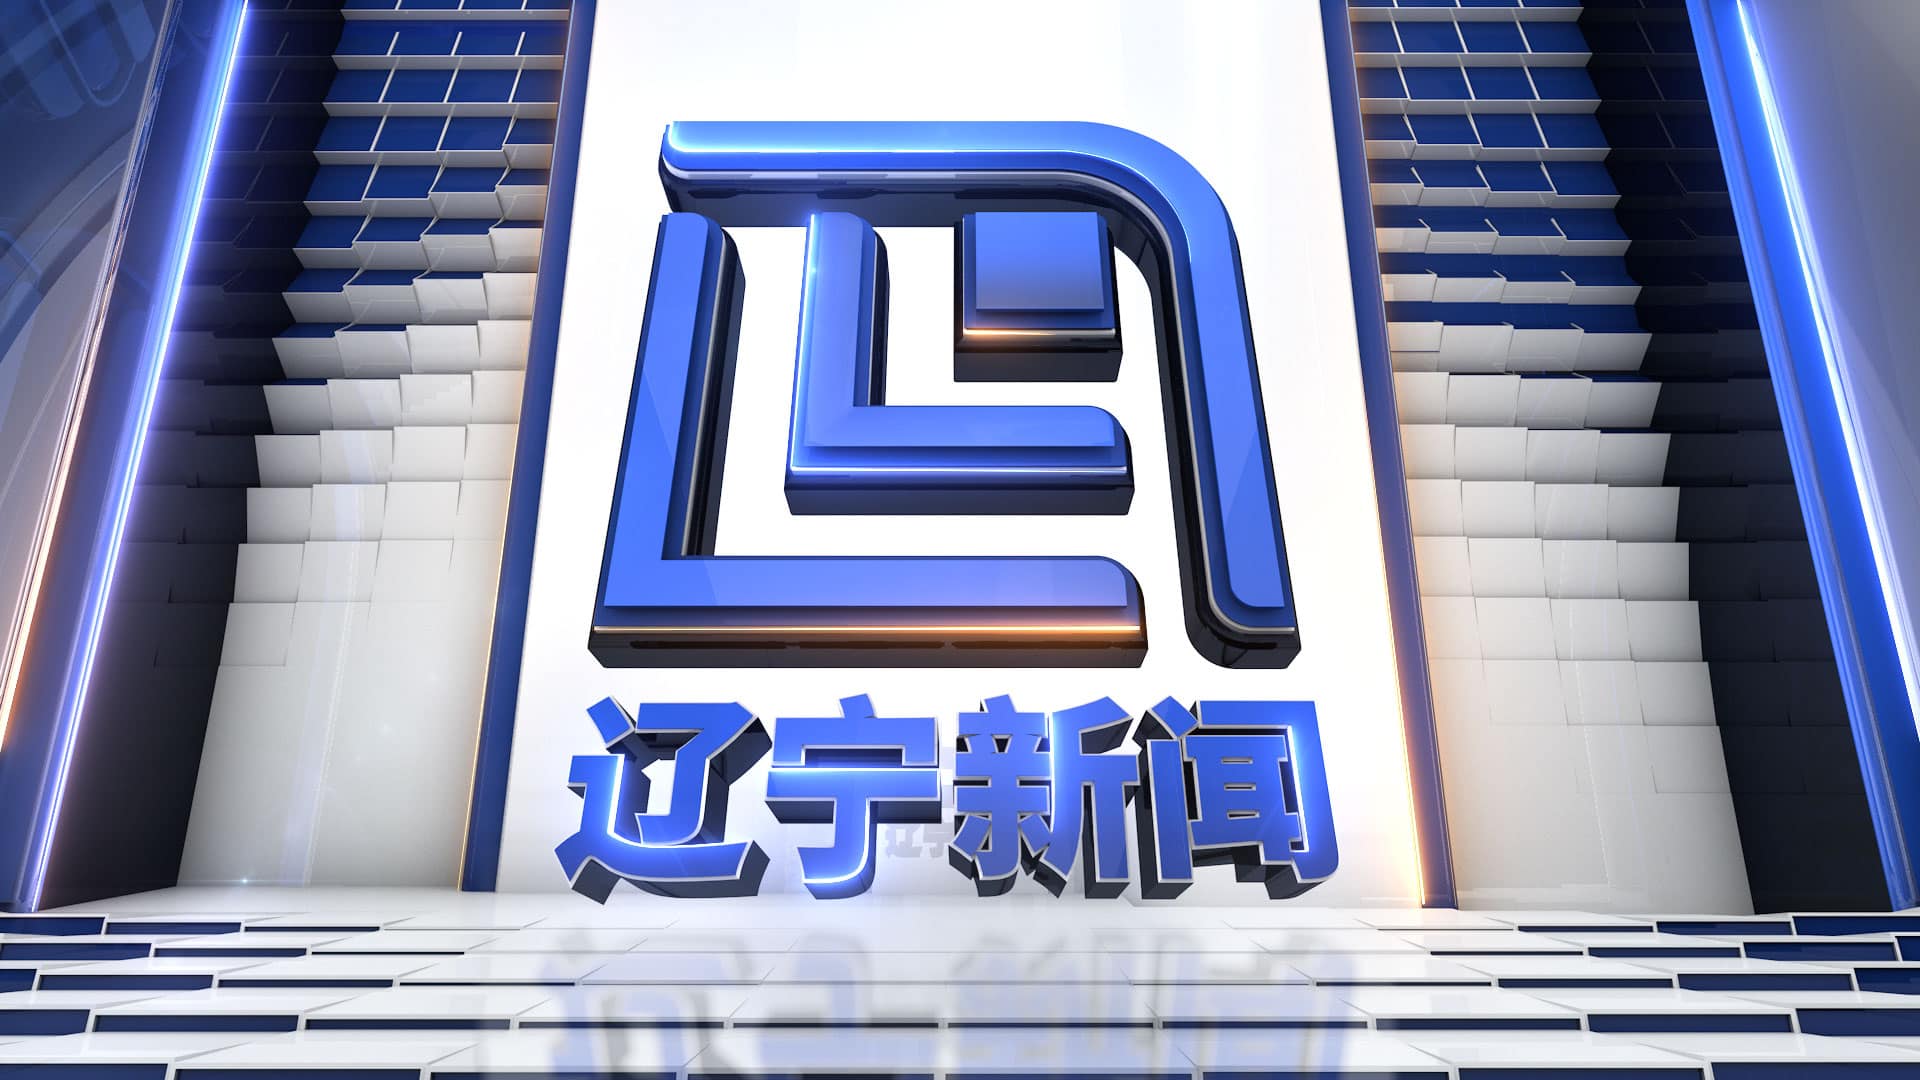 Liaoning News Concept